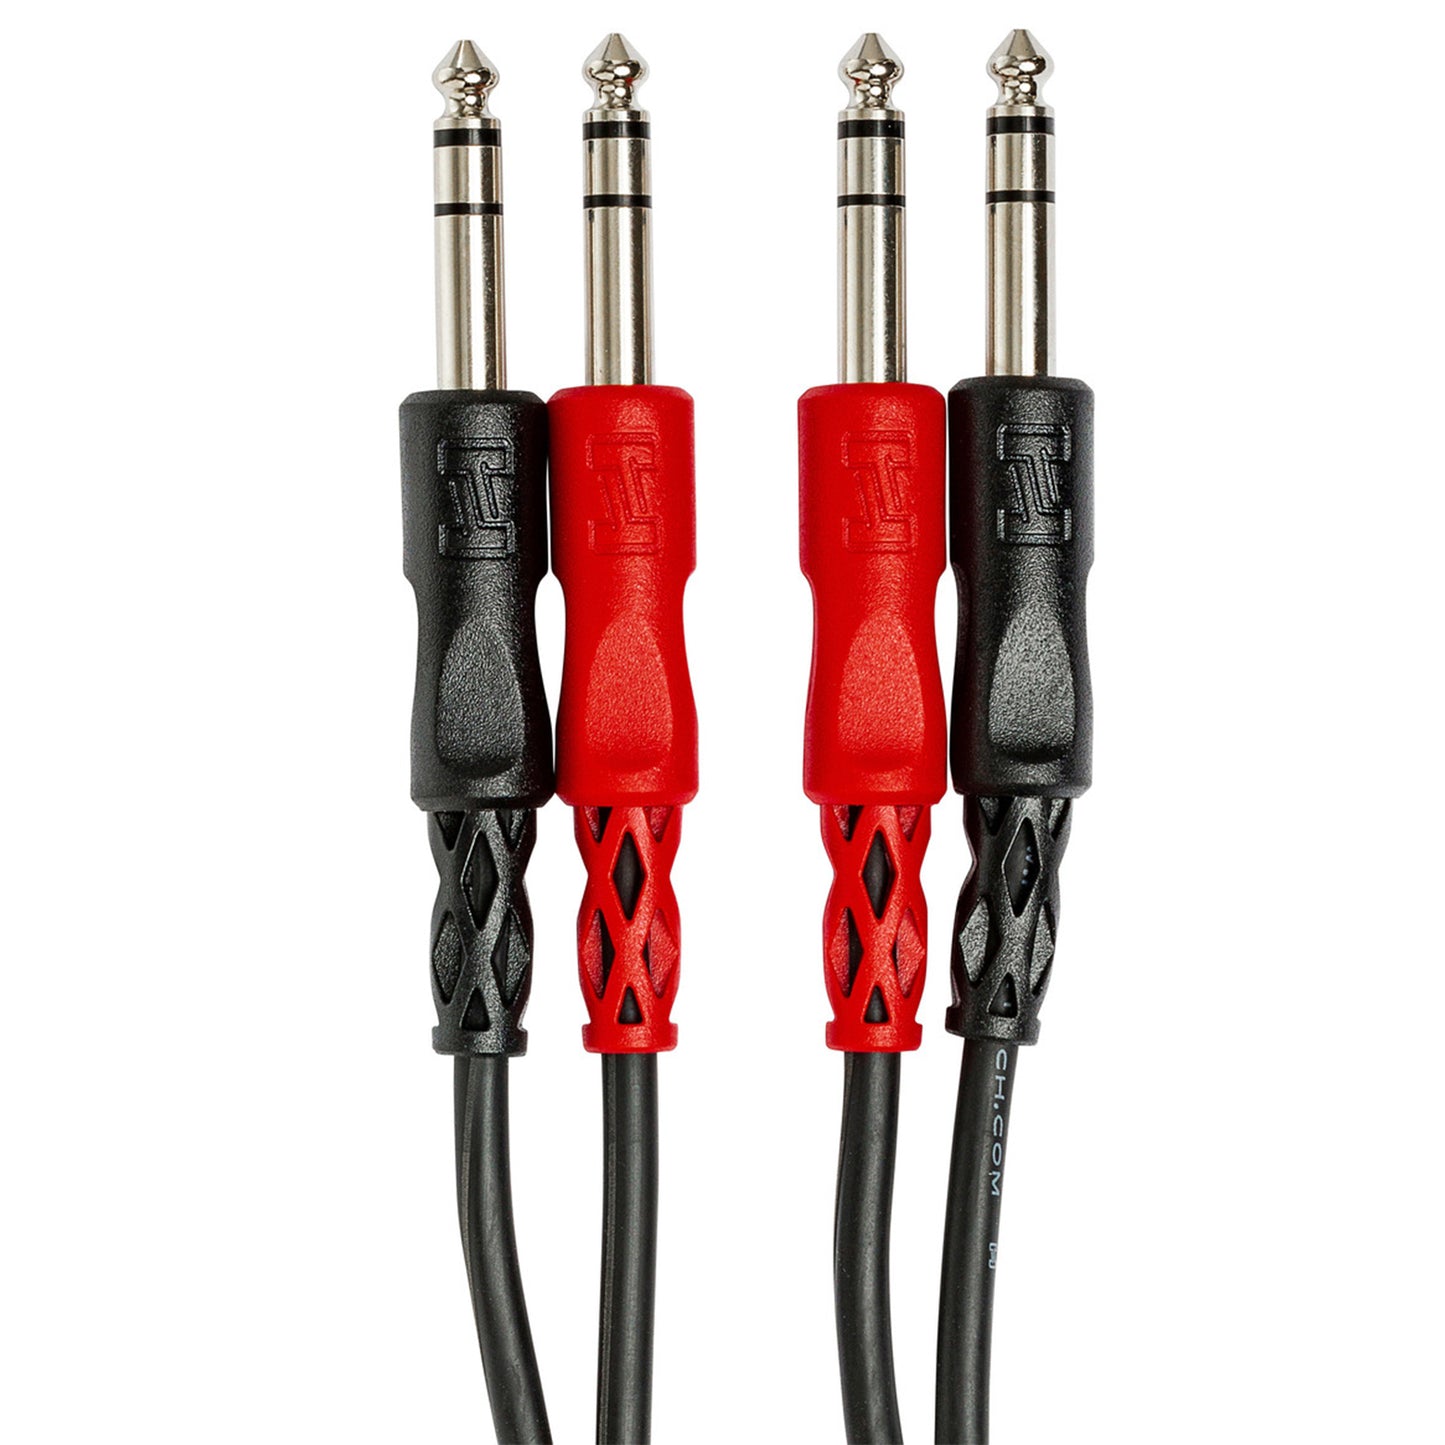 Hosa Technology CSS-202 Dual 1/4" TRS to Dual 1/4" TRS Stereo Interconnect Audio Cable Heavy Duty (2 Meters)